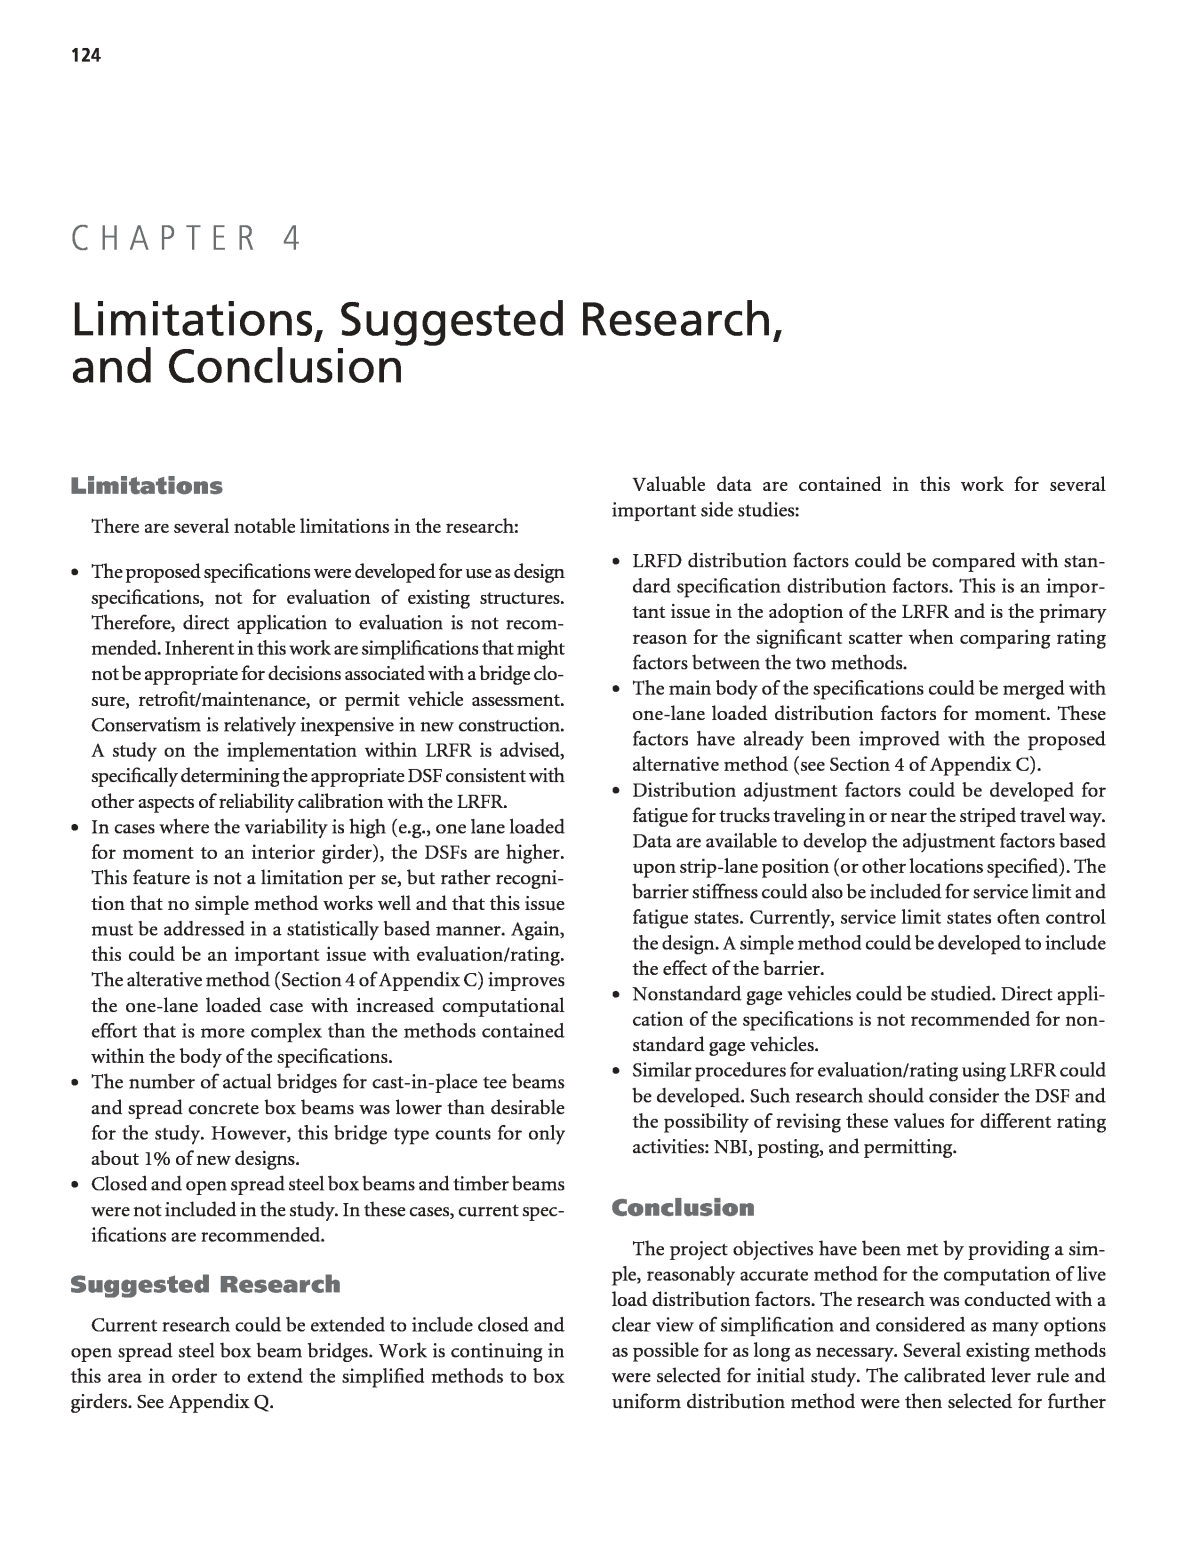 research limitations